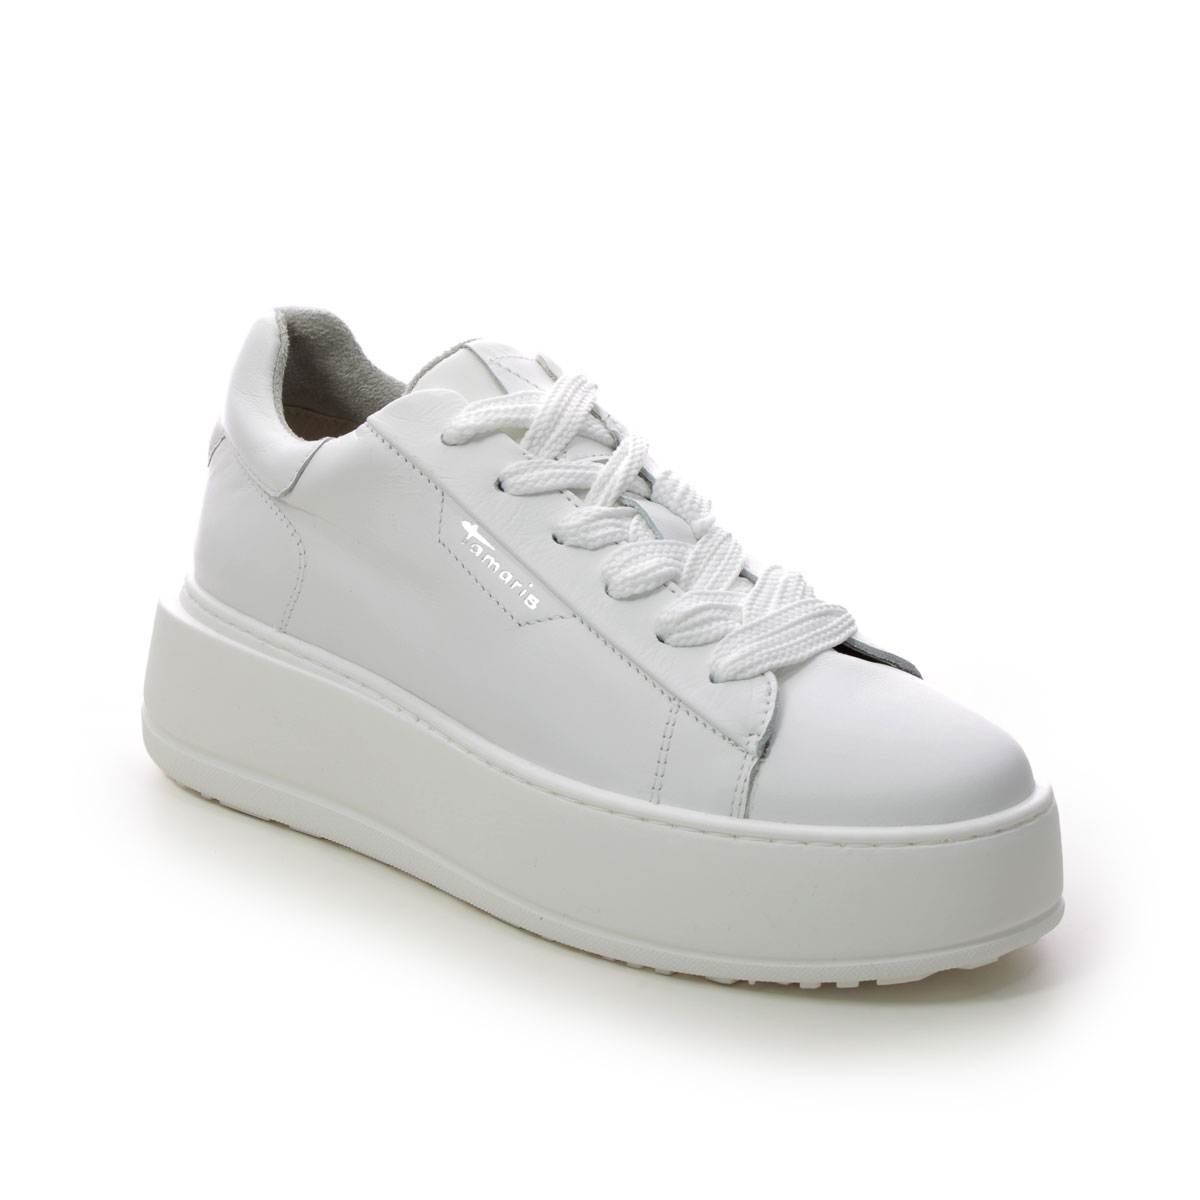 Tamaris Platform 50 White Leather Womens Trainers 23812-20-117 In Size 39 In Plain White Leather